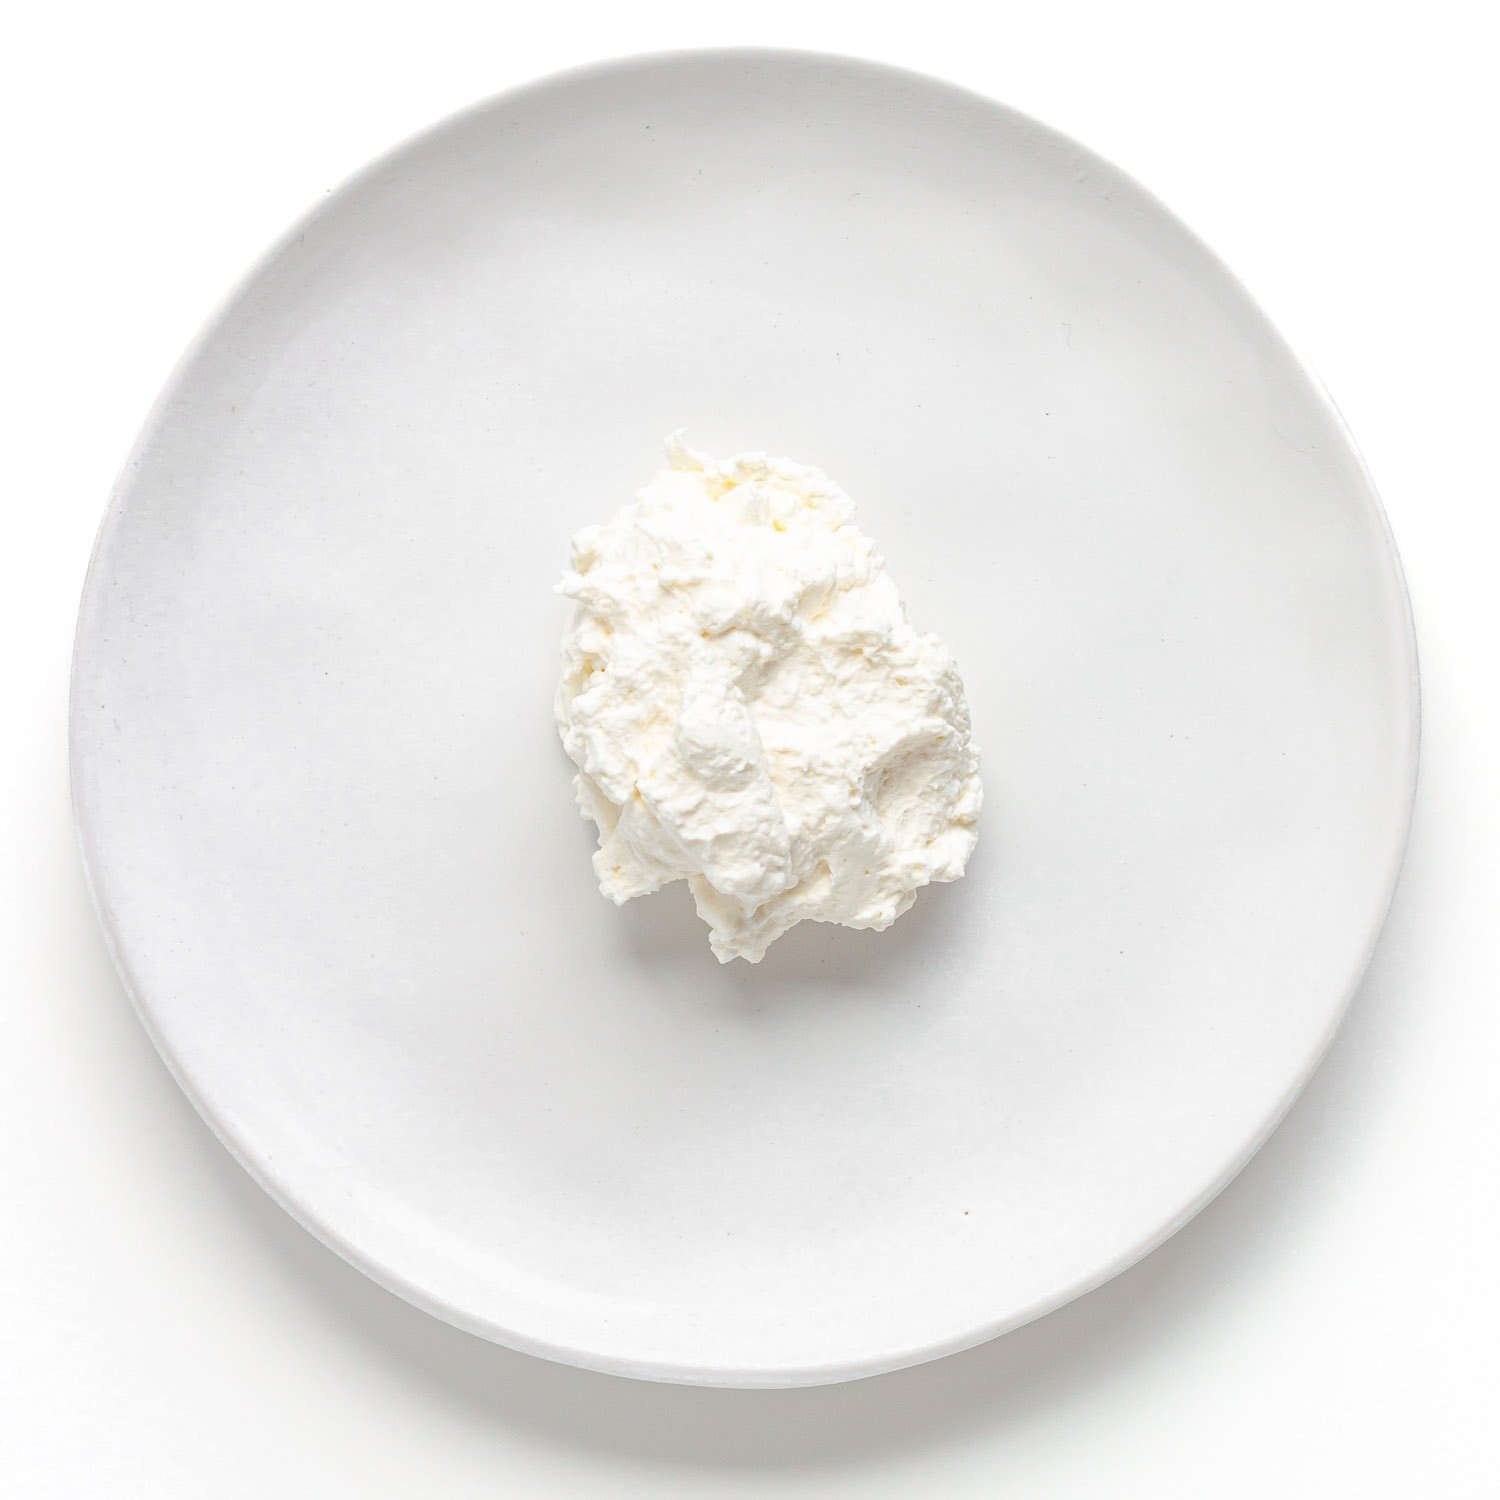 Dollop of whipped cream on the center of a white plate.